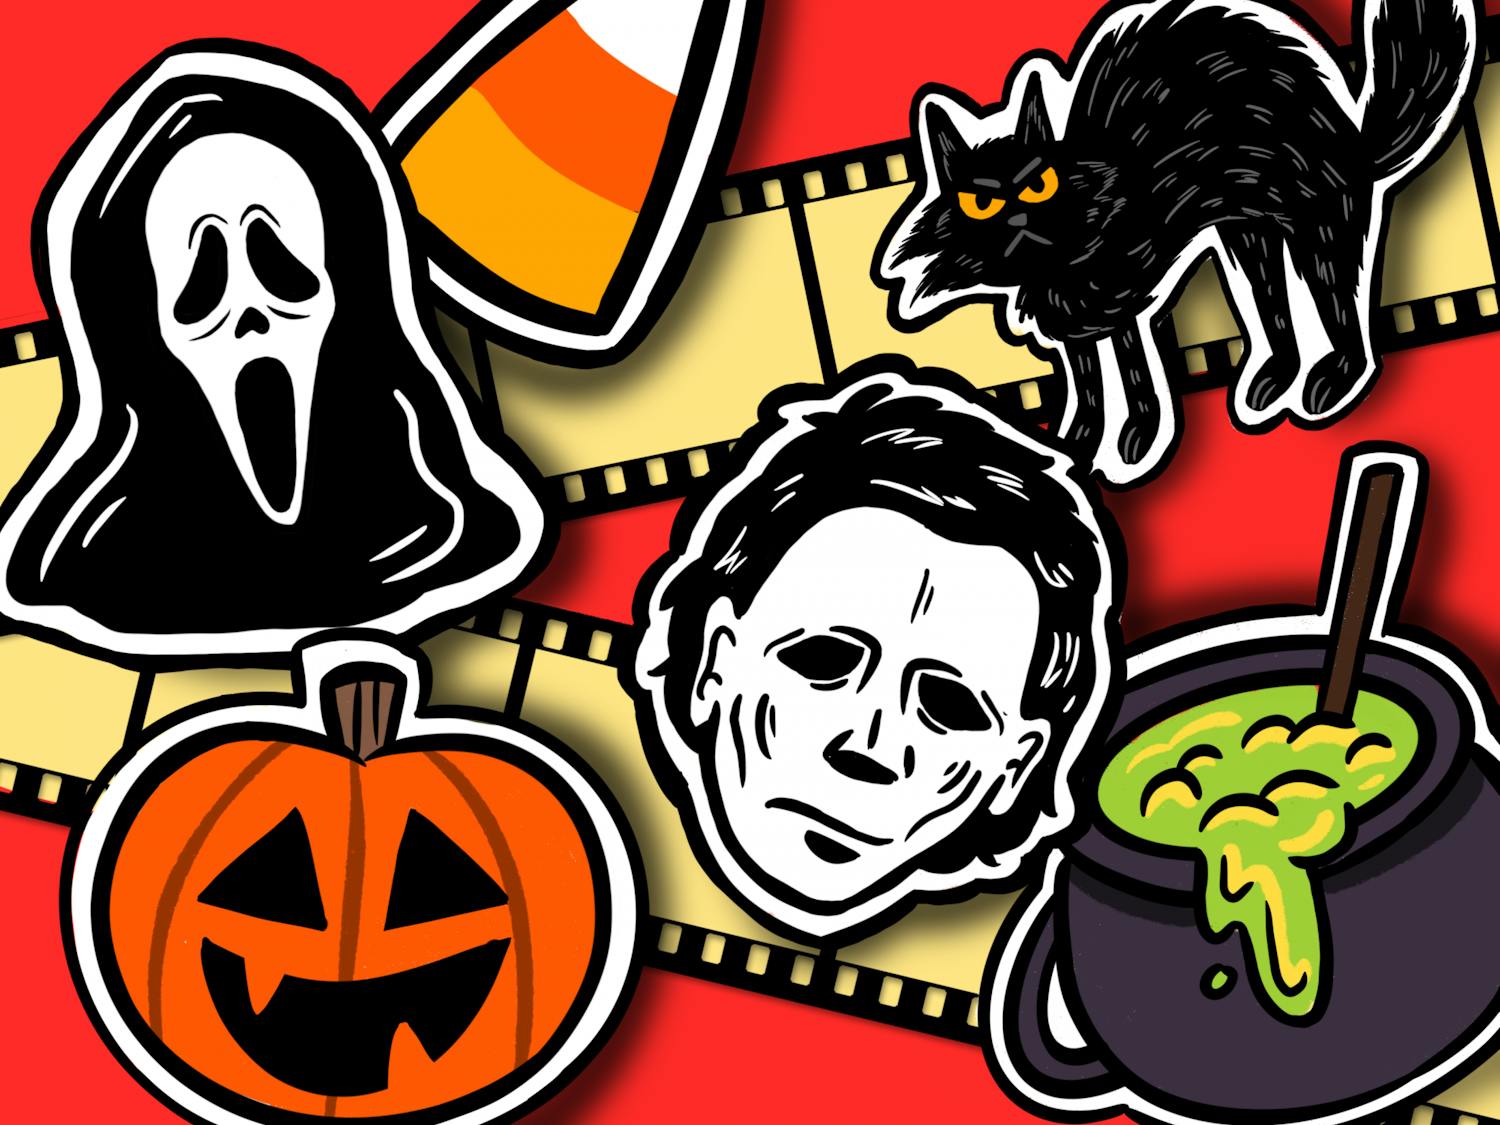 VINCE_Top 5 Halloween movies to help you get into the spooky mood_LA.png